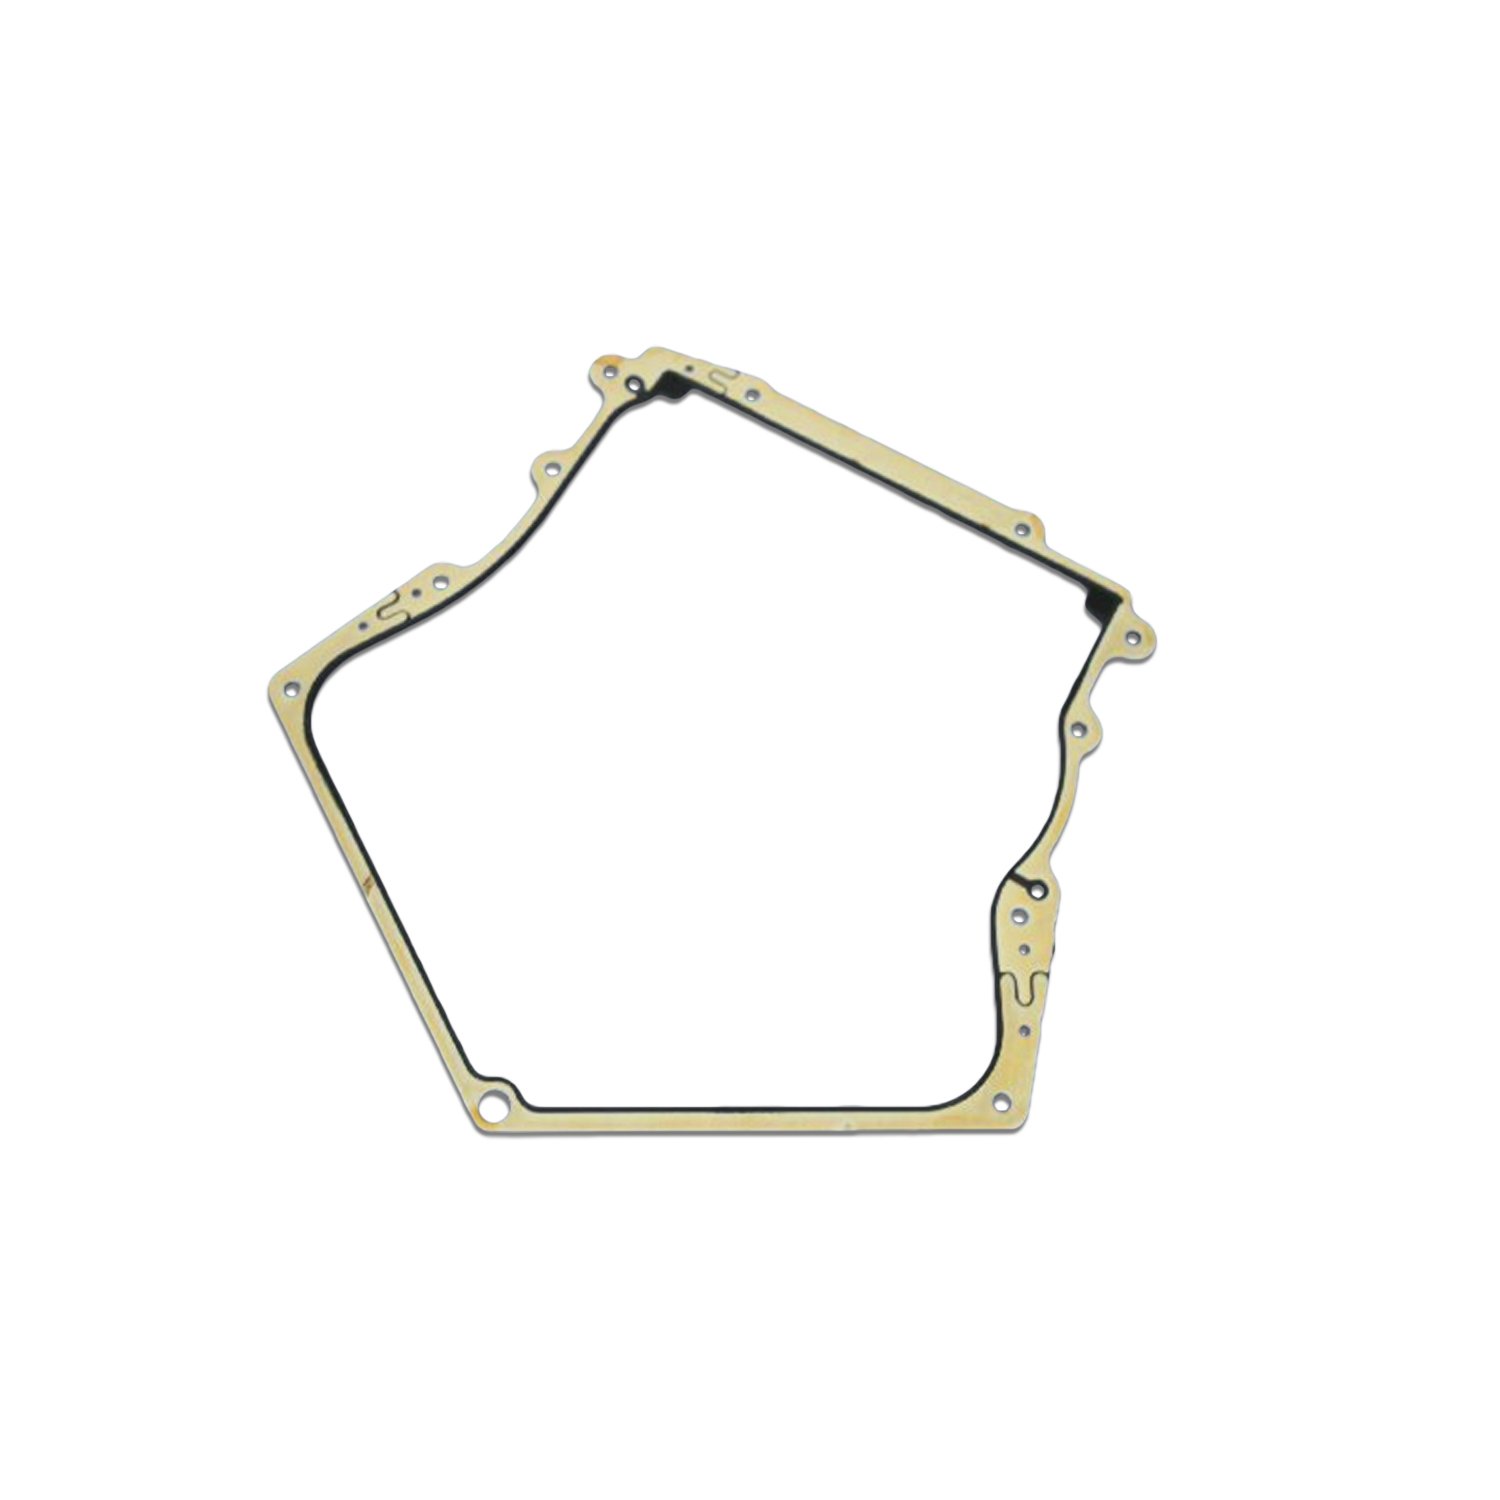 GASKET CHAIN CASE COVER